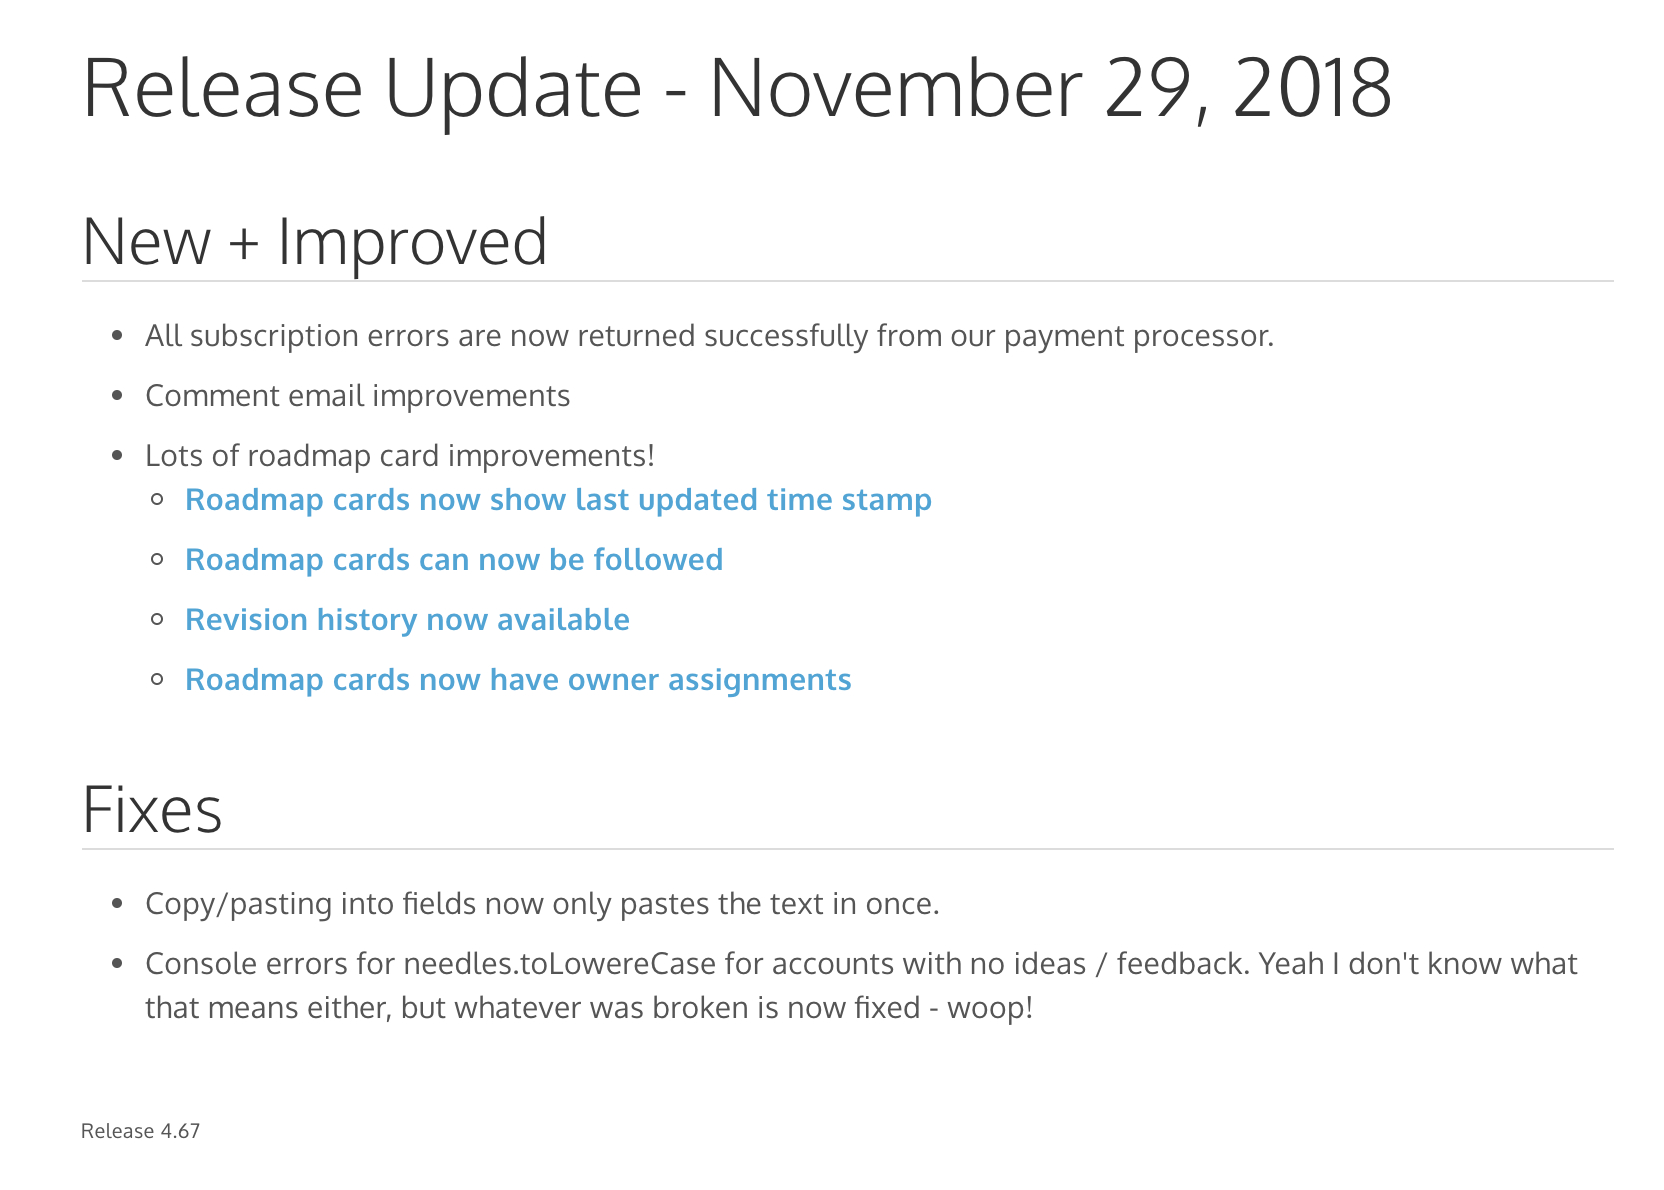 How To Write Great Release Notes | Prodpad Throughout Software Release Notes Template Word